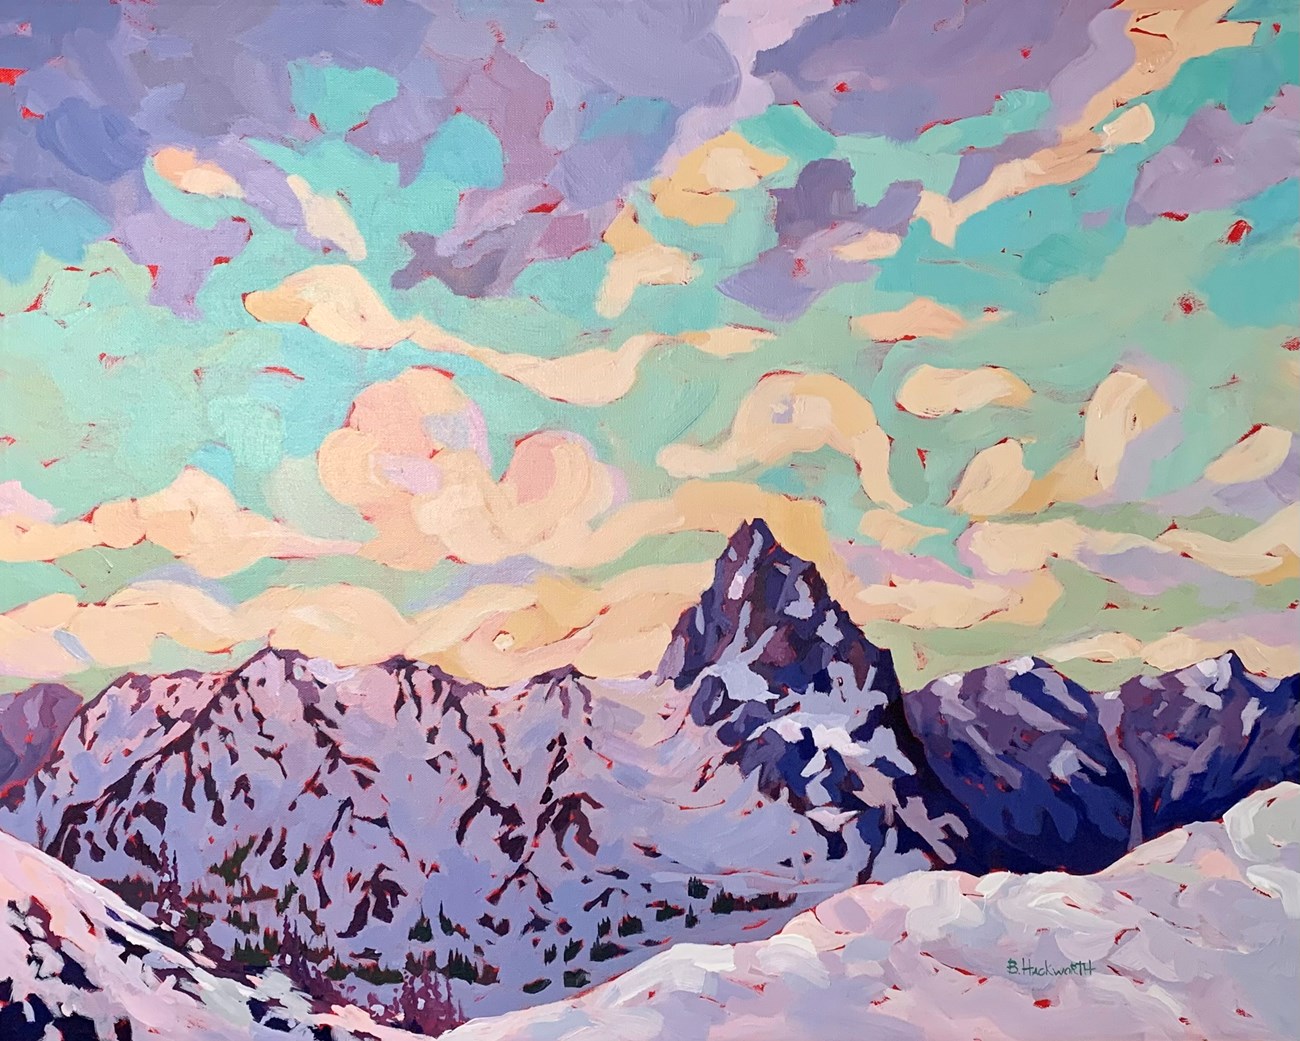 A painting of a snowy mountain landscape in shades of purple. Purple clouds above dissipate into white and blue sky.